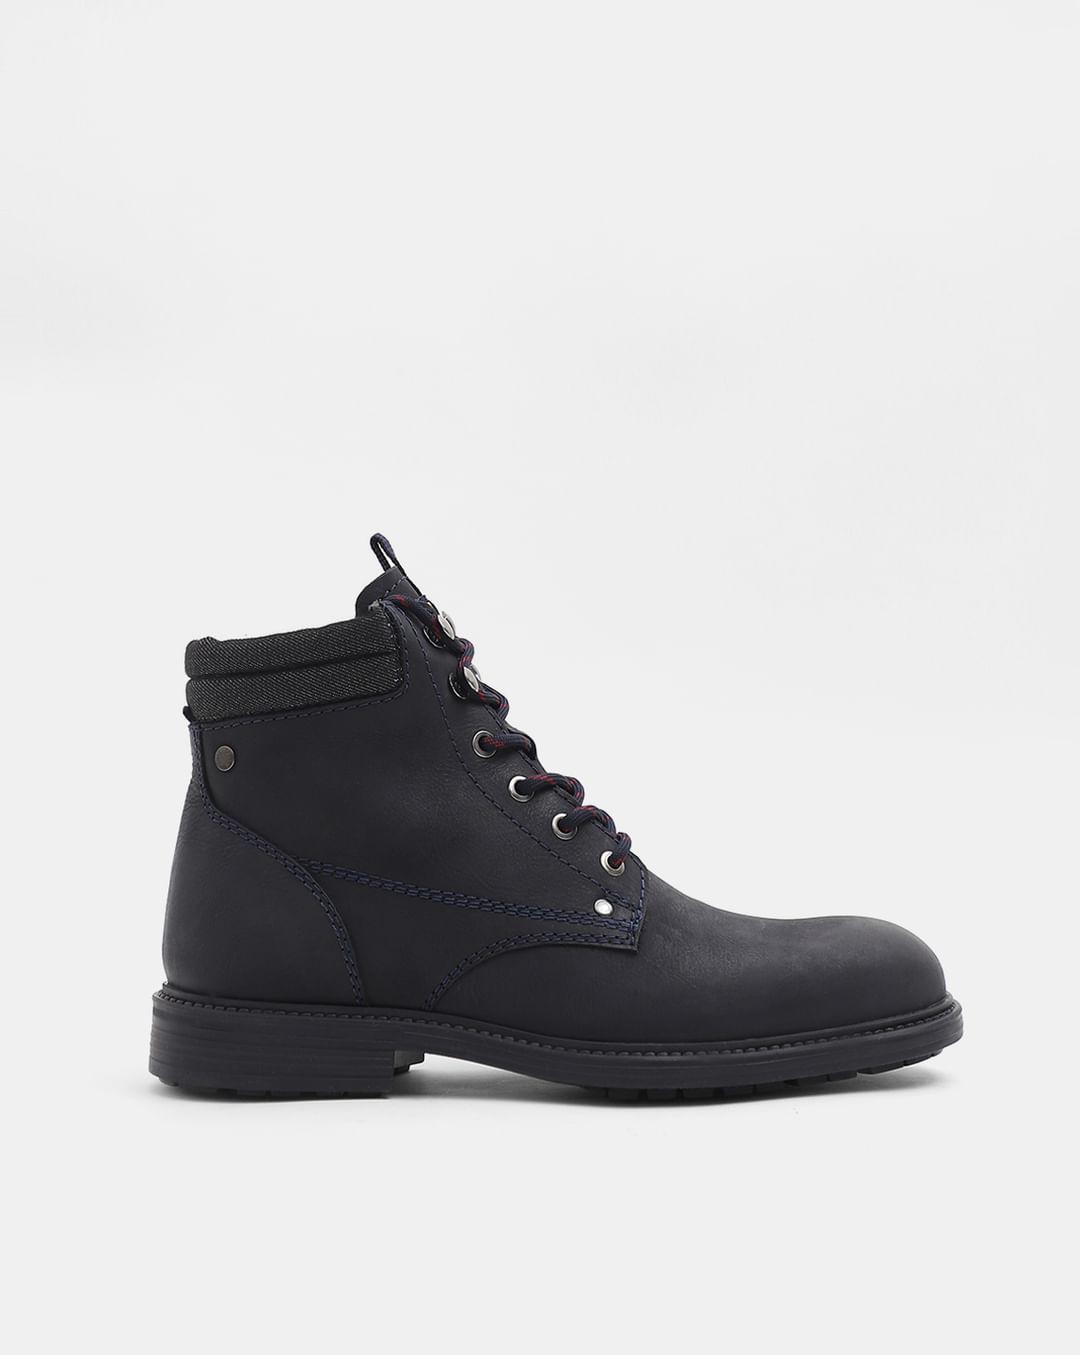 navy blue premium leather boots